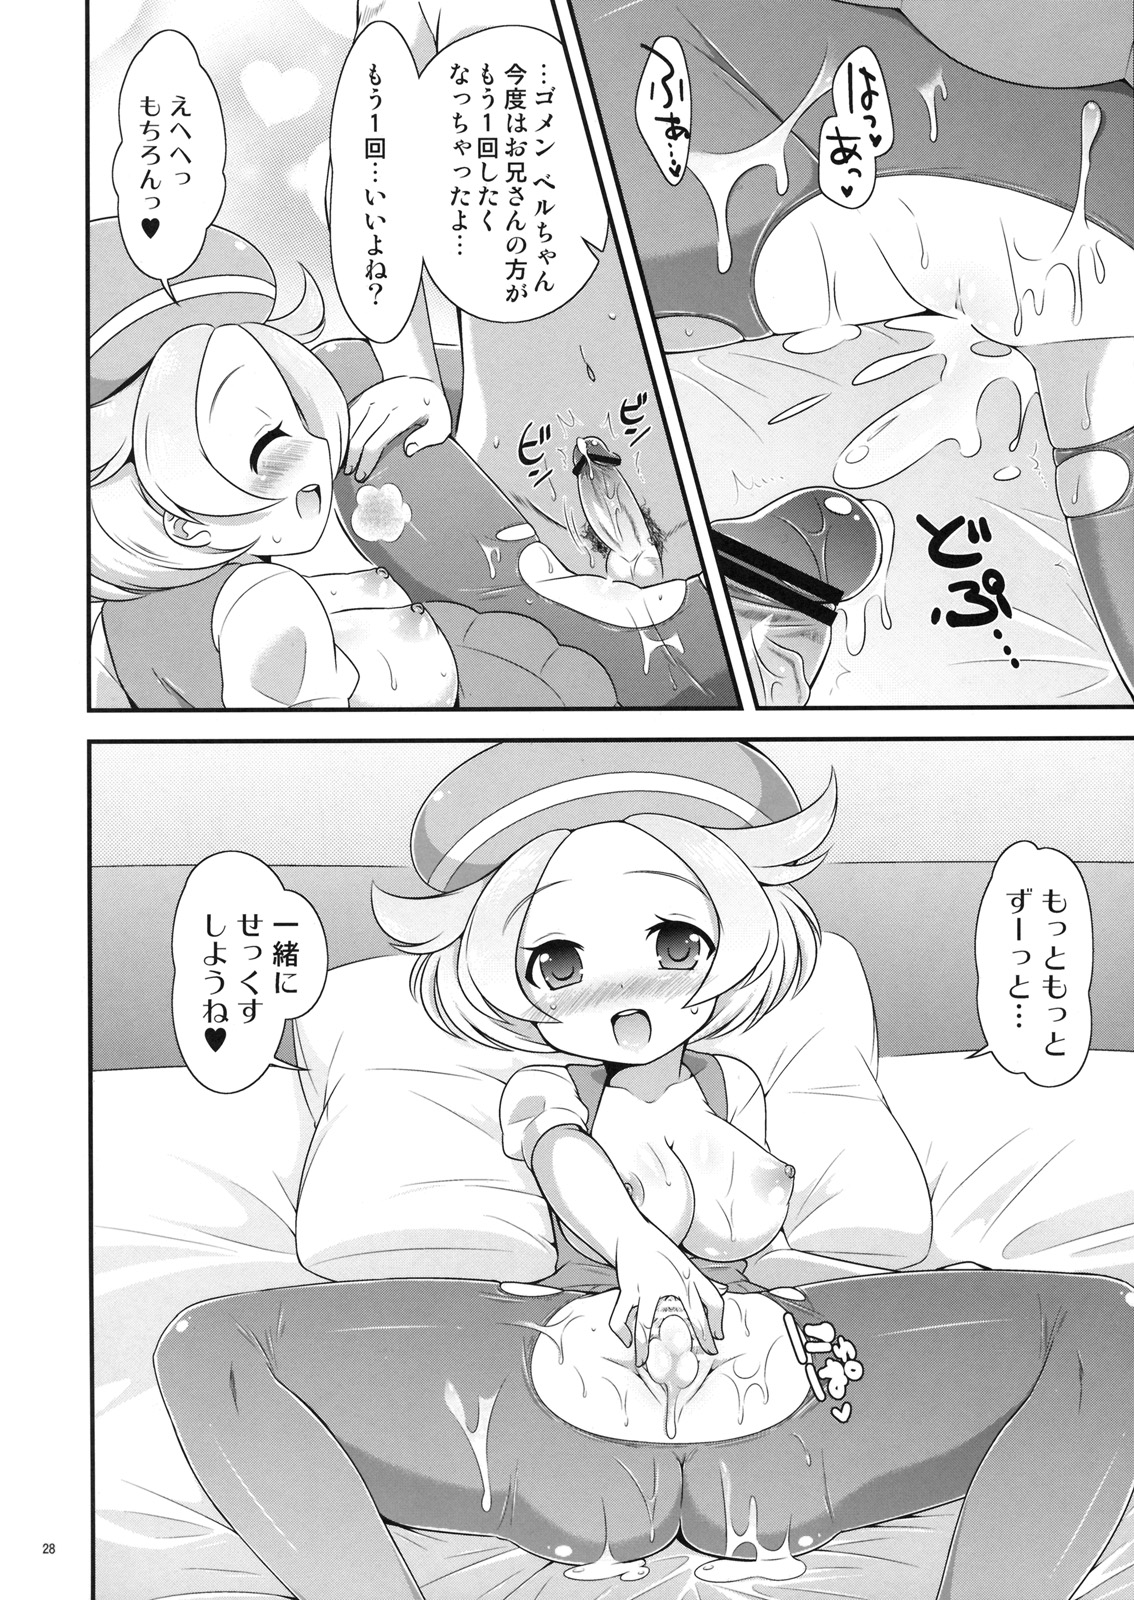 (C80) [Potch Pocket] Bel-chan to Asobo! (Pokemon Black and White) page 27 full